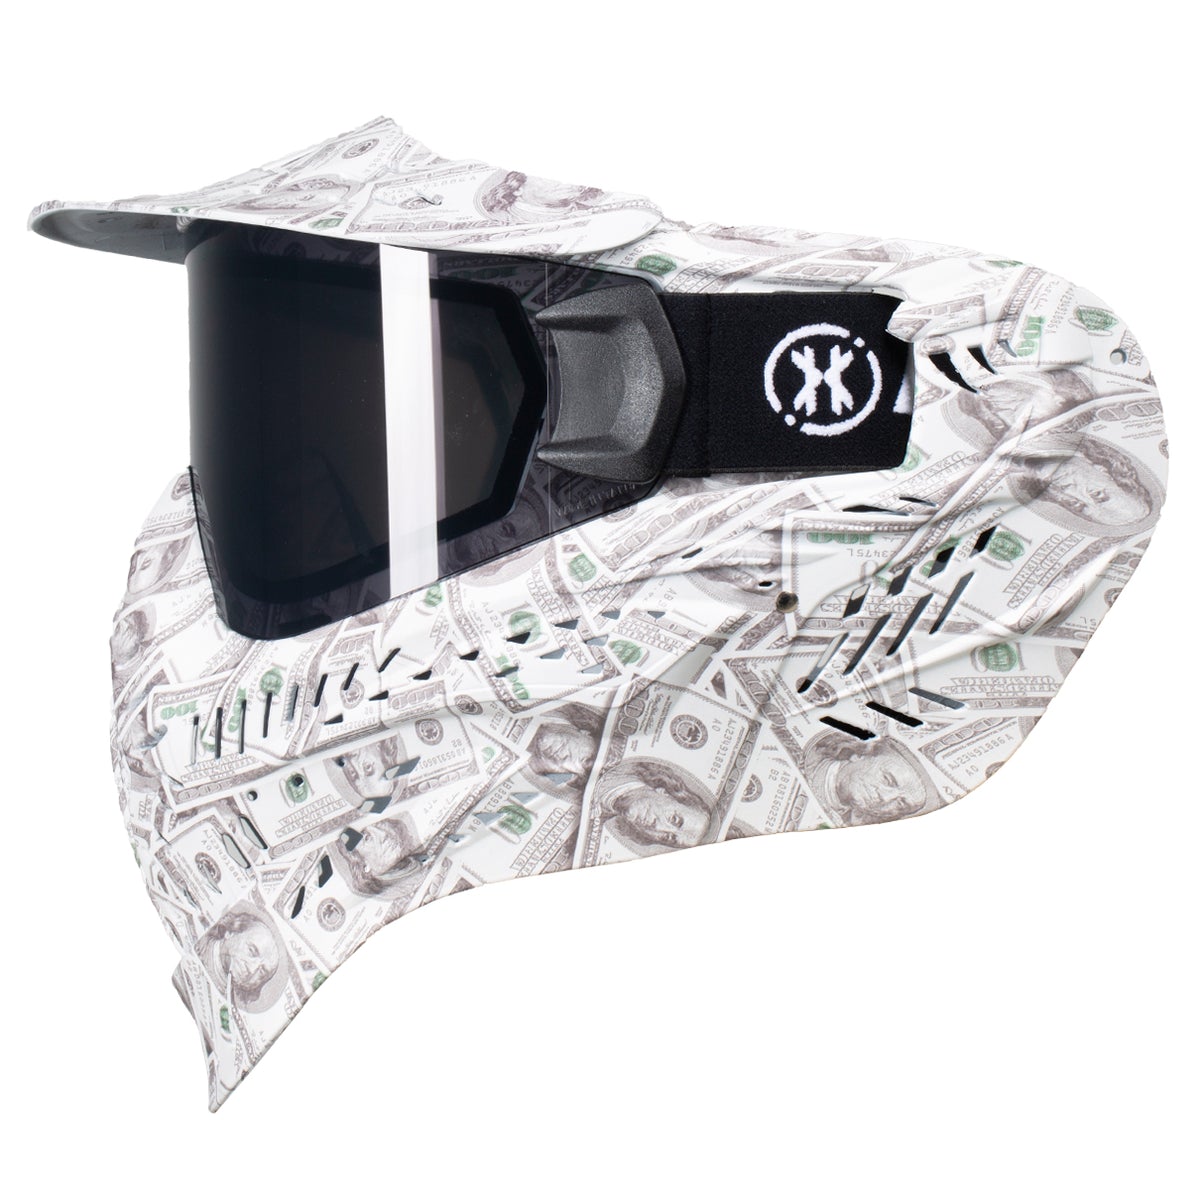 HK Army HSTL Thermal Goggle - Money - Eminent Paintball And Airsoft